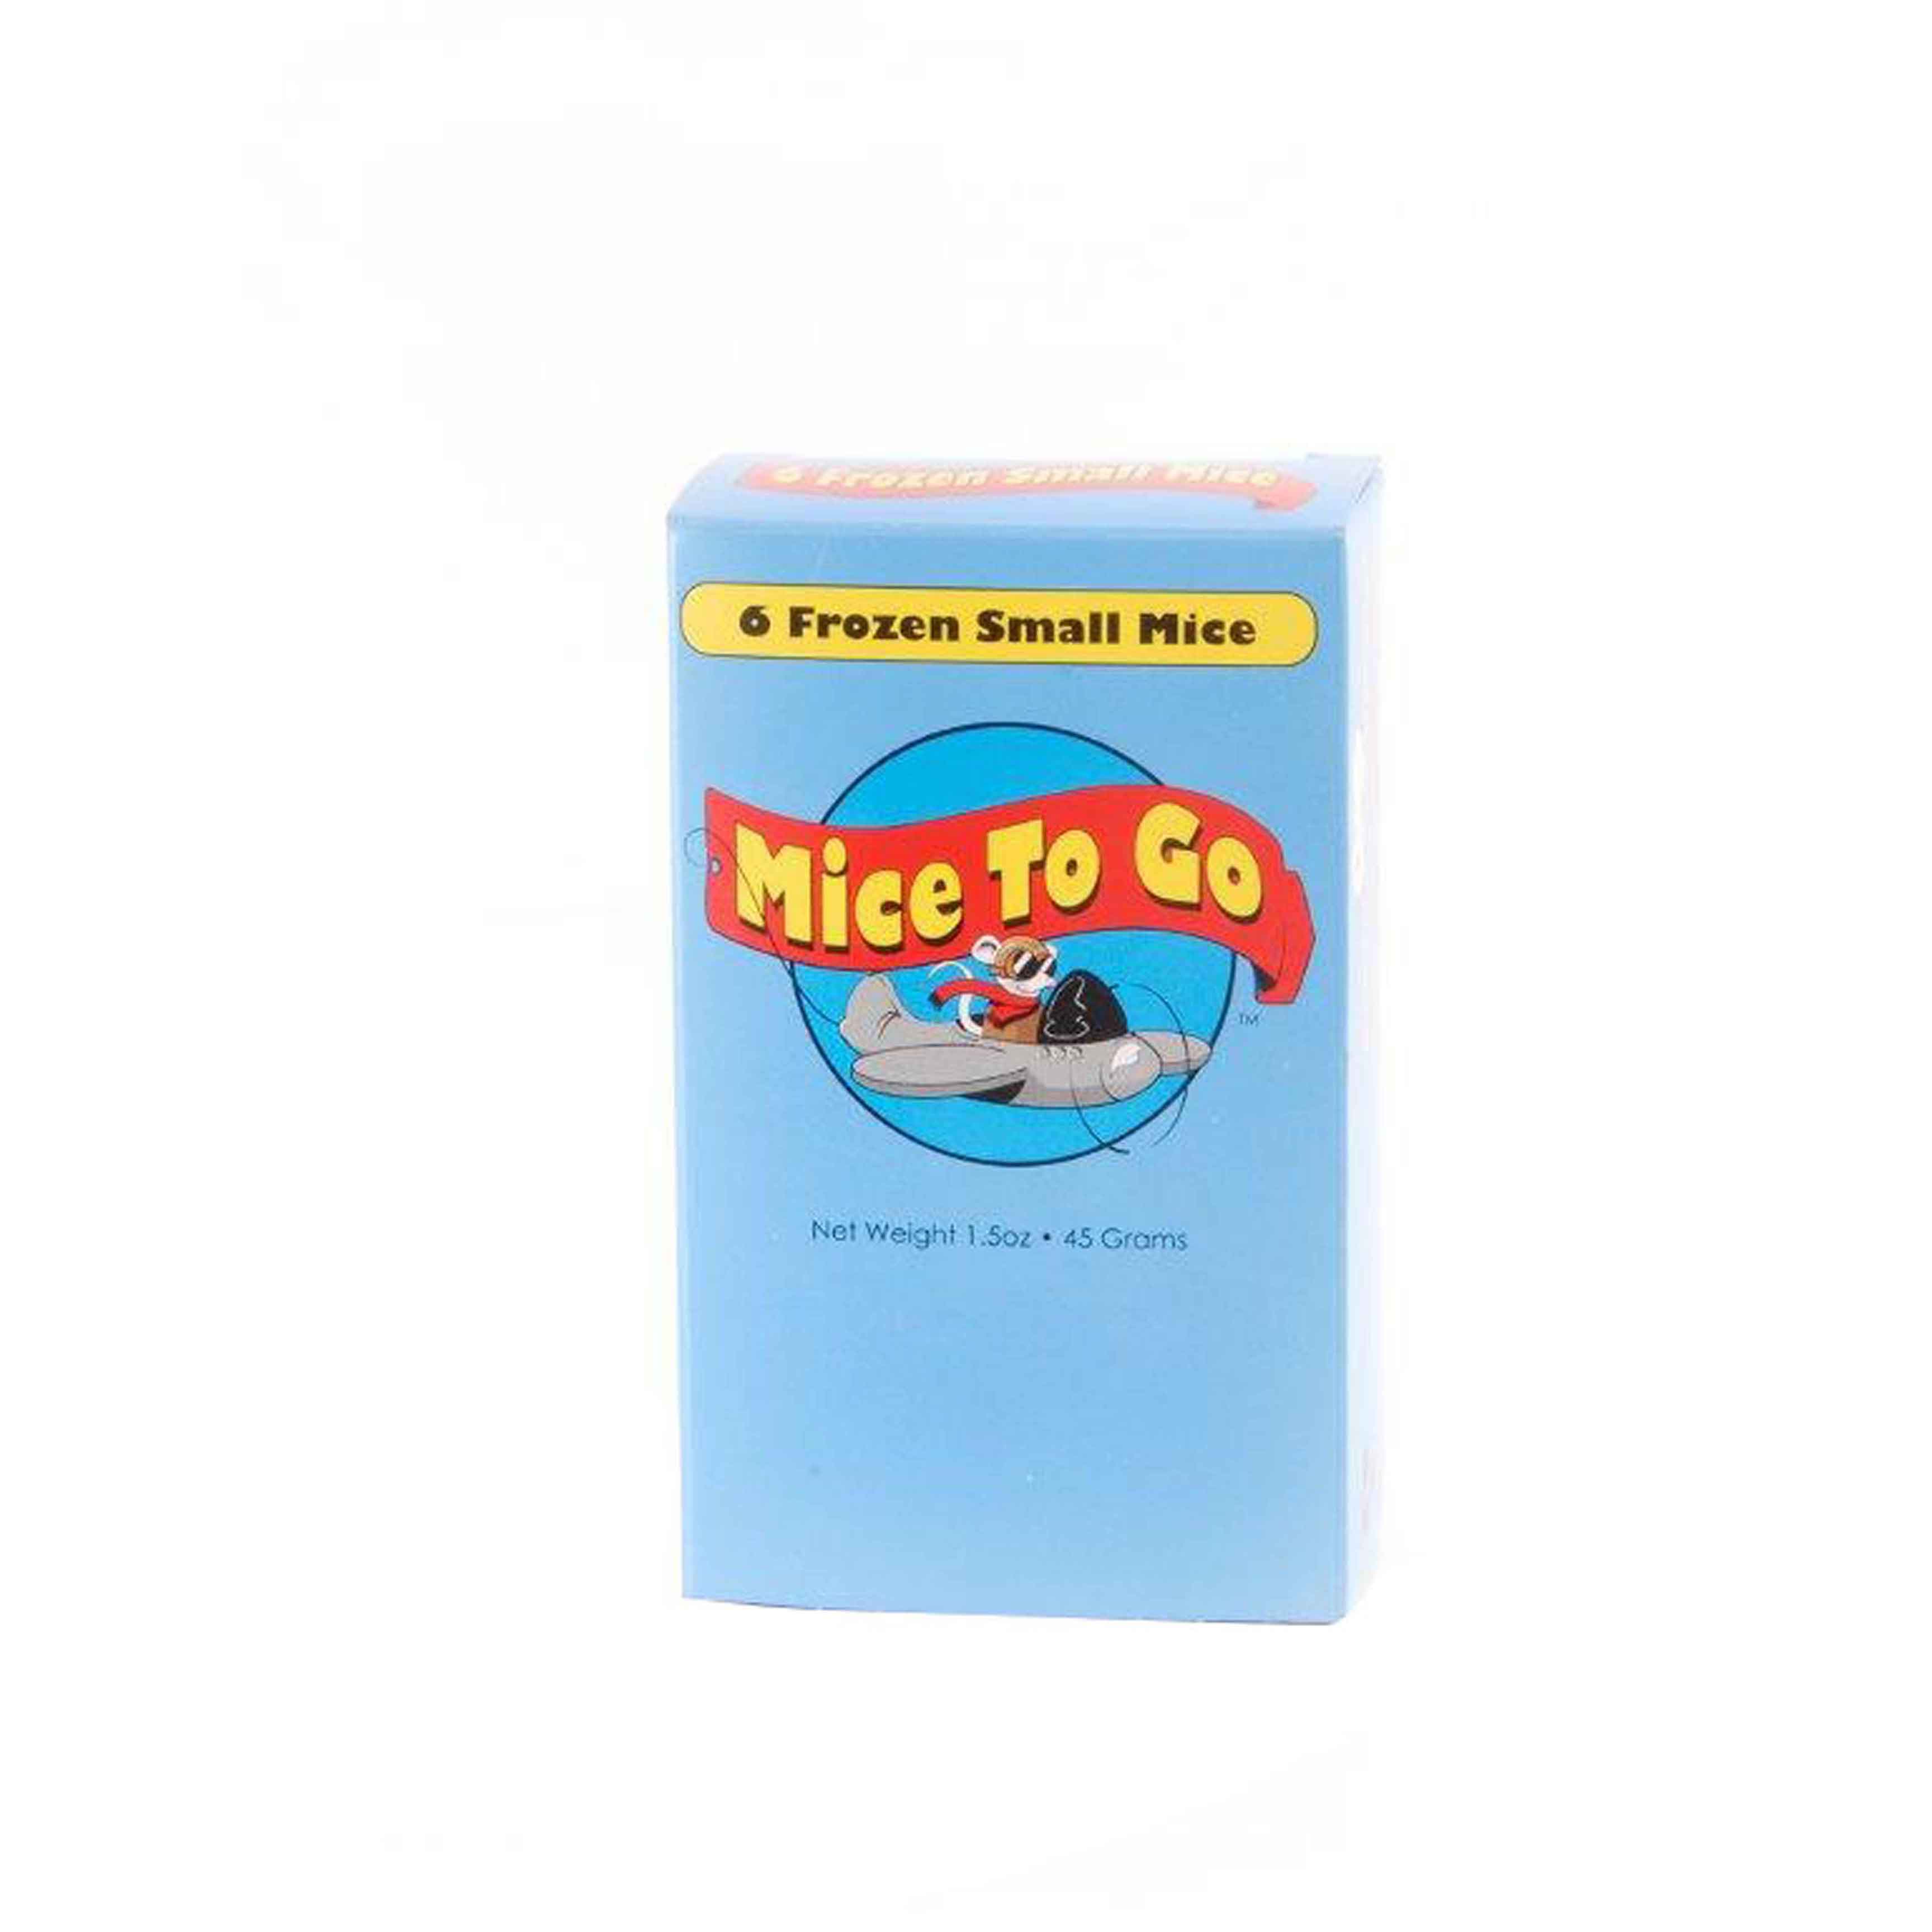 Mice To Go Small Mouse 6ct 1.5oz